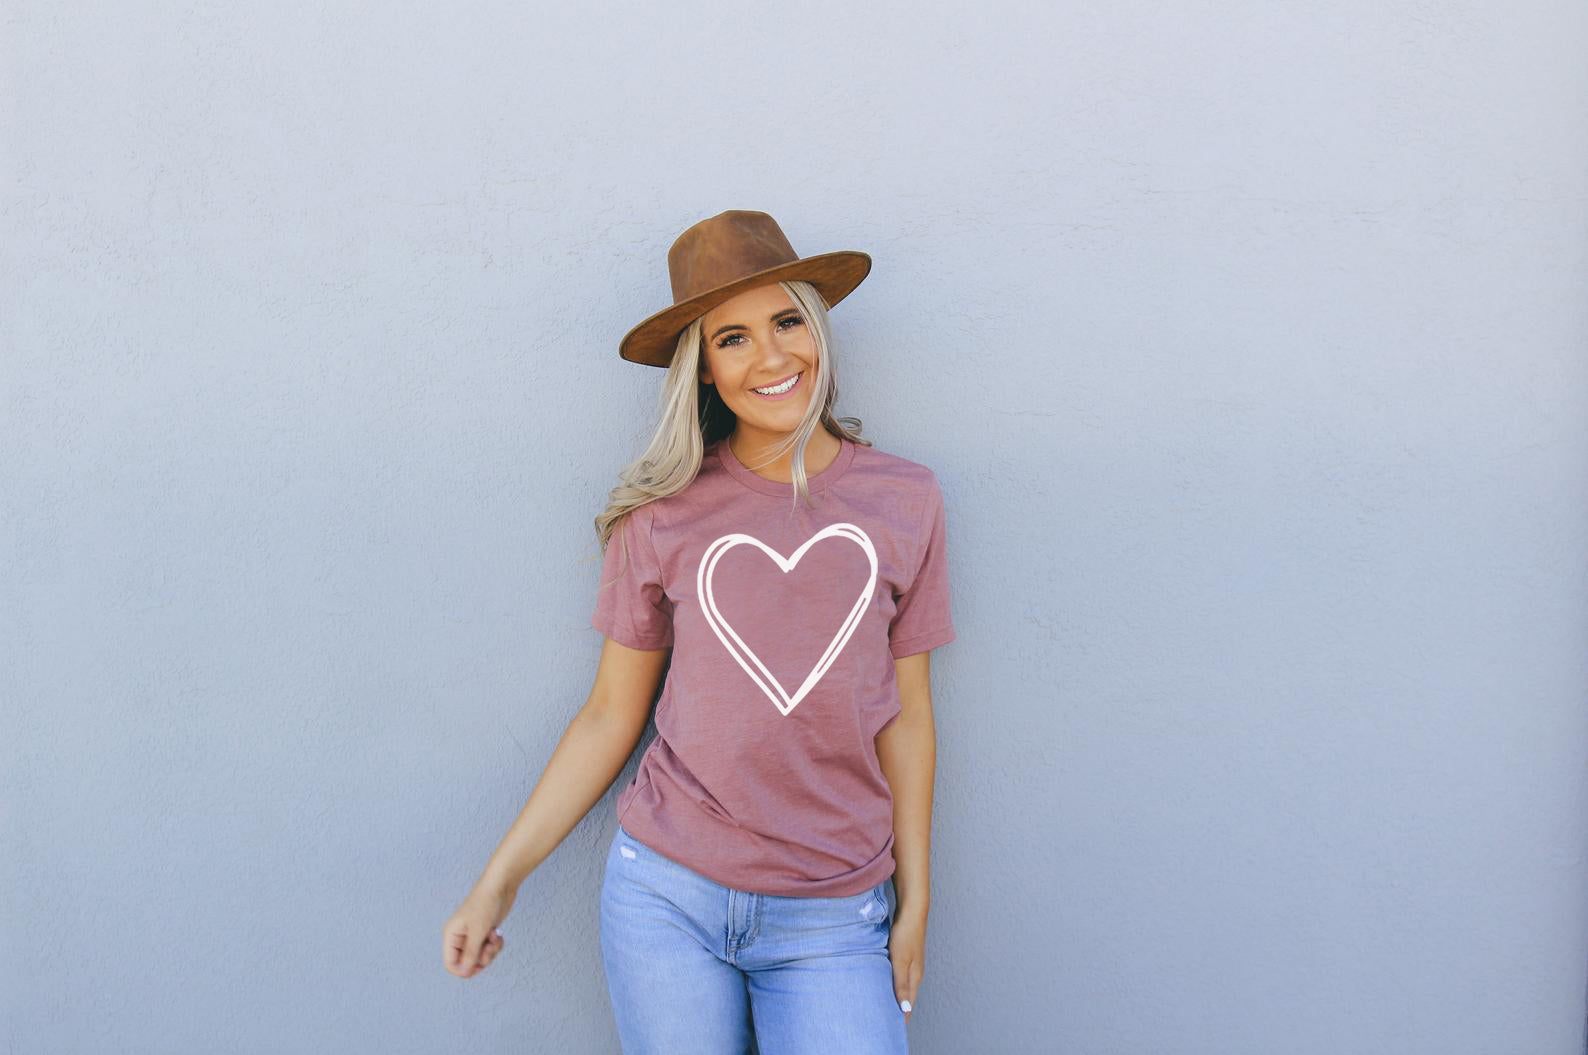 The "Heart" Tee - For a Cause